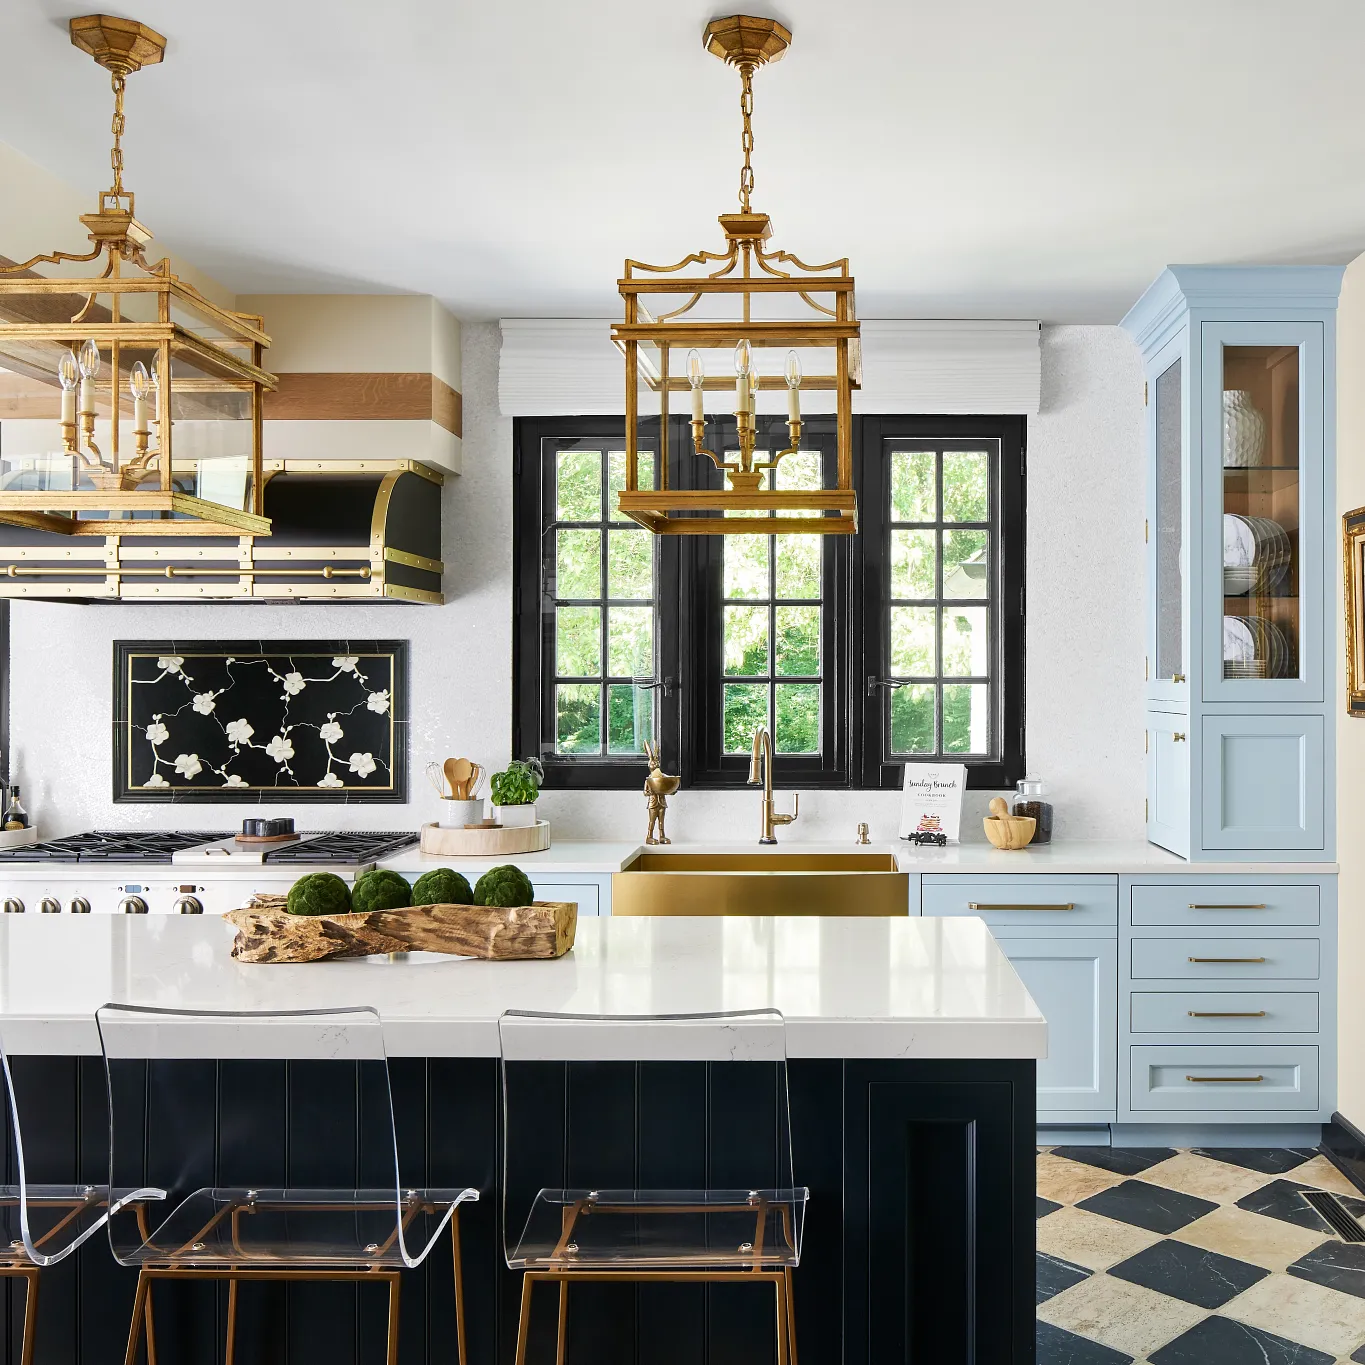 Tour The Lake Forest Showhouse With Stunning Quartz Surfaces - Cambria ...